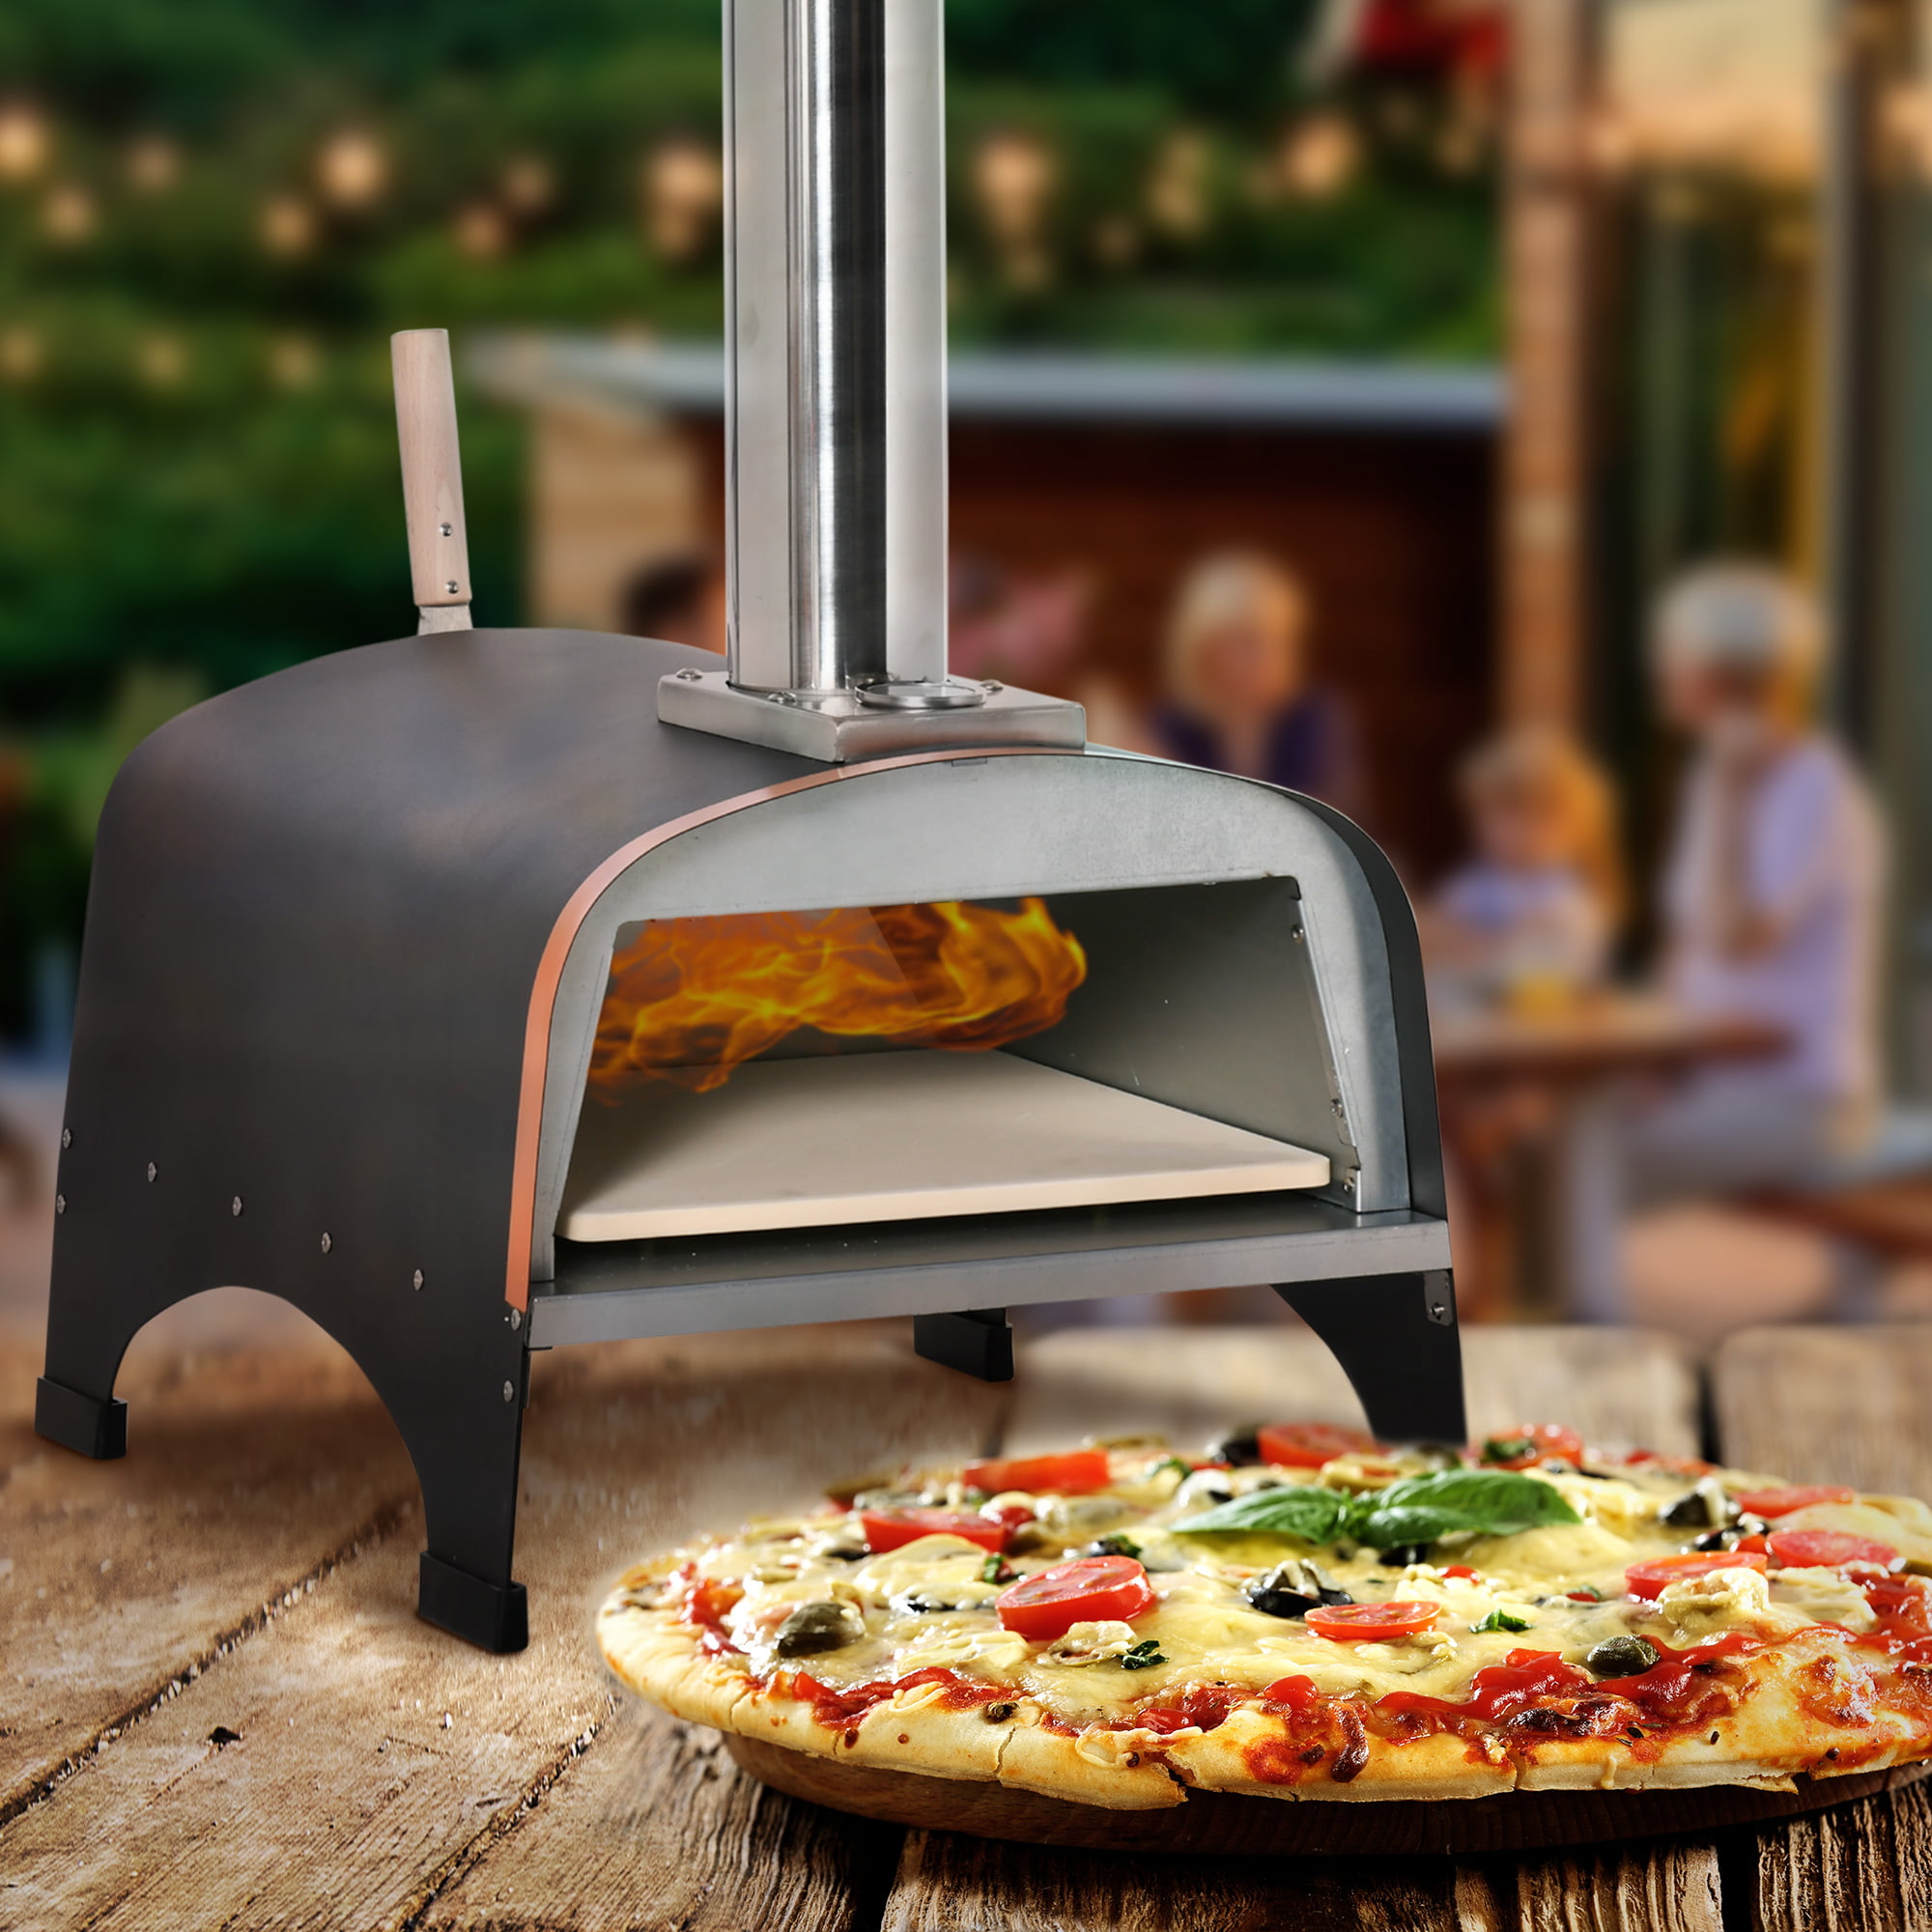 East Oak 12 Outdoor Pizza Oven with Easy Pellet Loader, Wood Fired BBQ Countertop Pizza Maker with 360° Rotating Stone for Outside Kitchen, Cooking